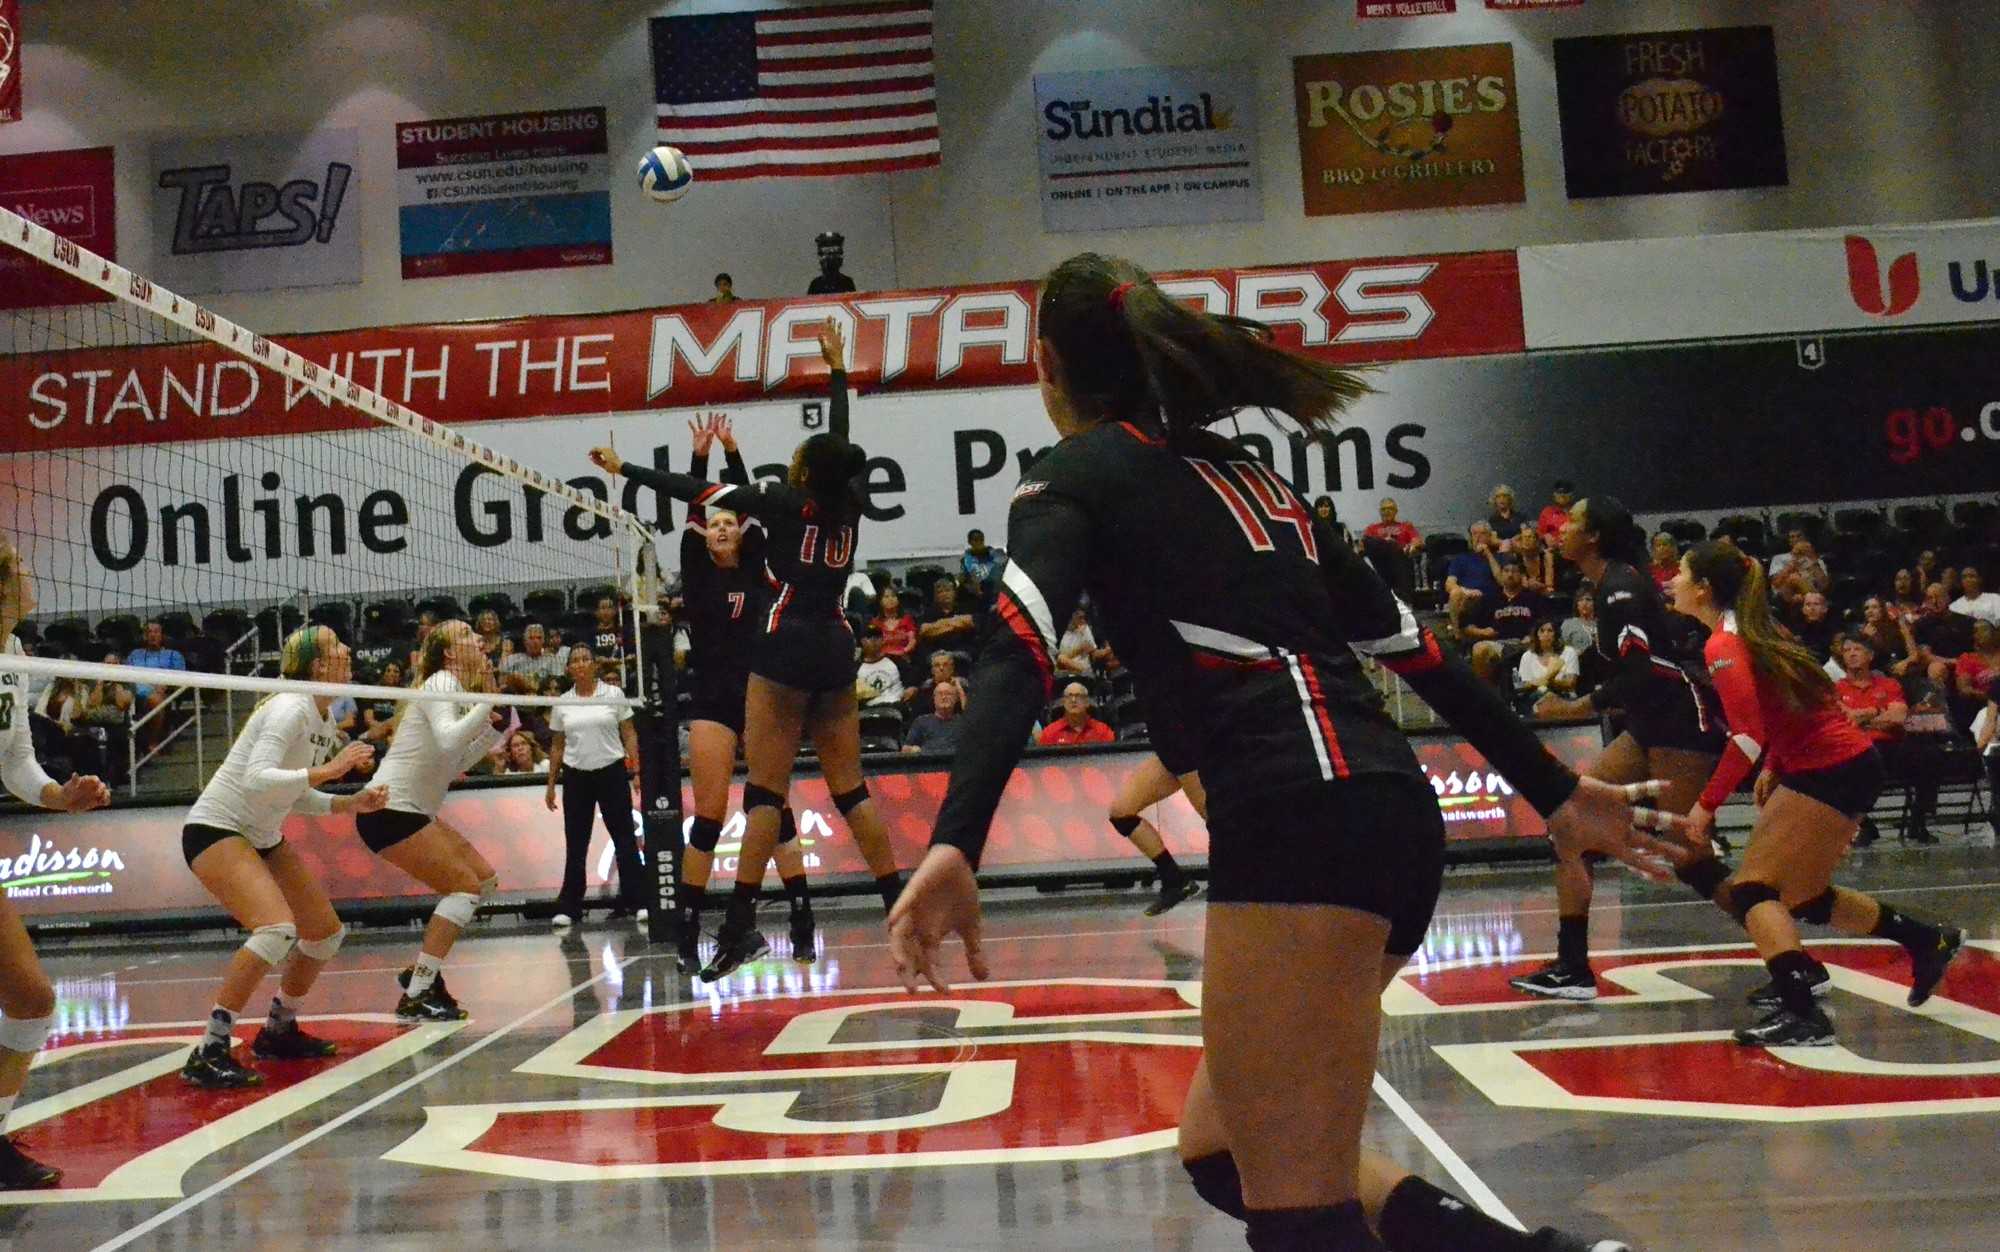 The Matadors' junior setter, Lauren Conati (center-left), and freshman middle blocker Morgan Salone (center-right) leap to intercept the volleyball during their game against the Cal Poly Mustangs on Saturday, October 1 at the Matadome. Photo credit: Eric Licas